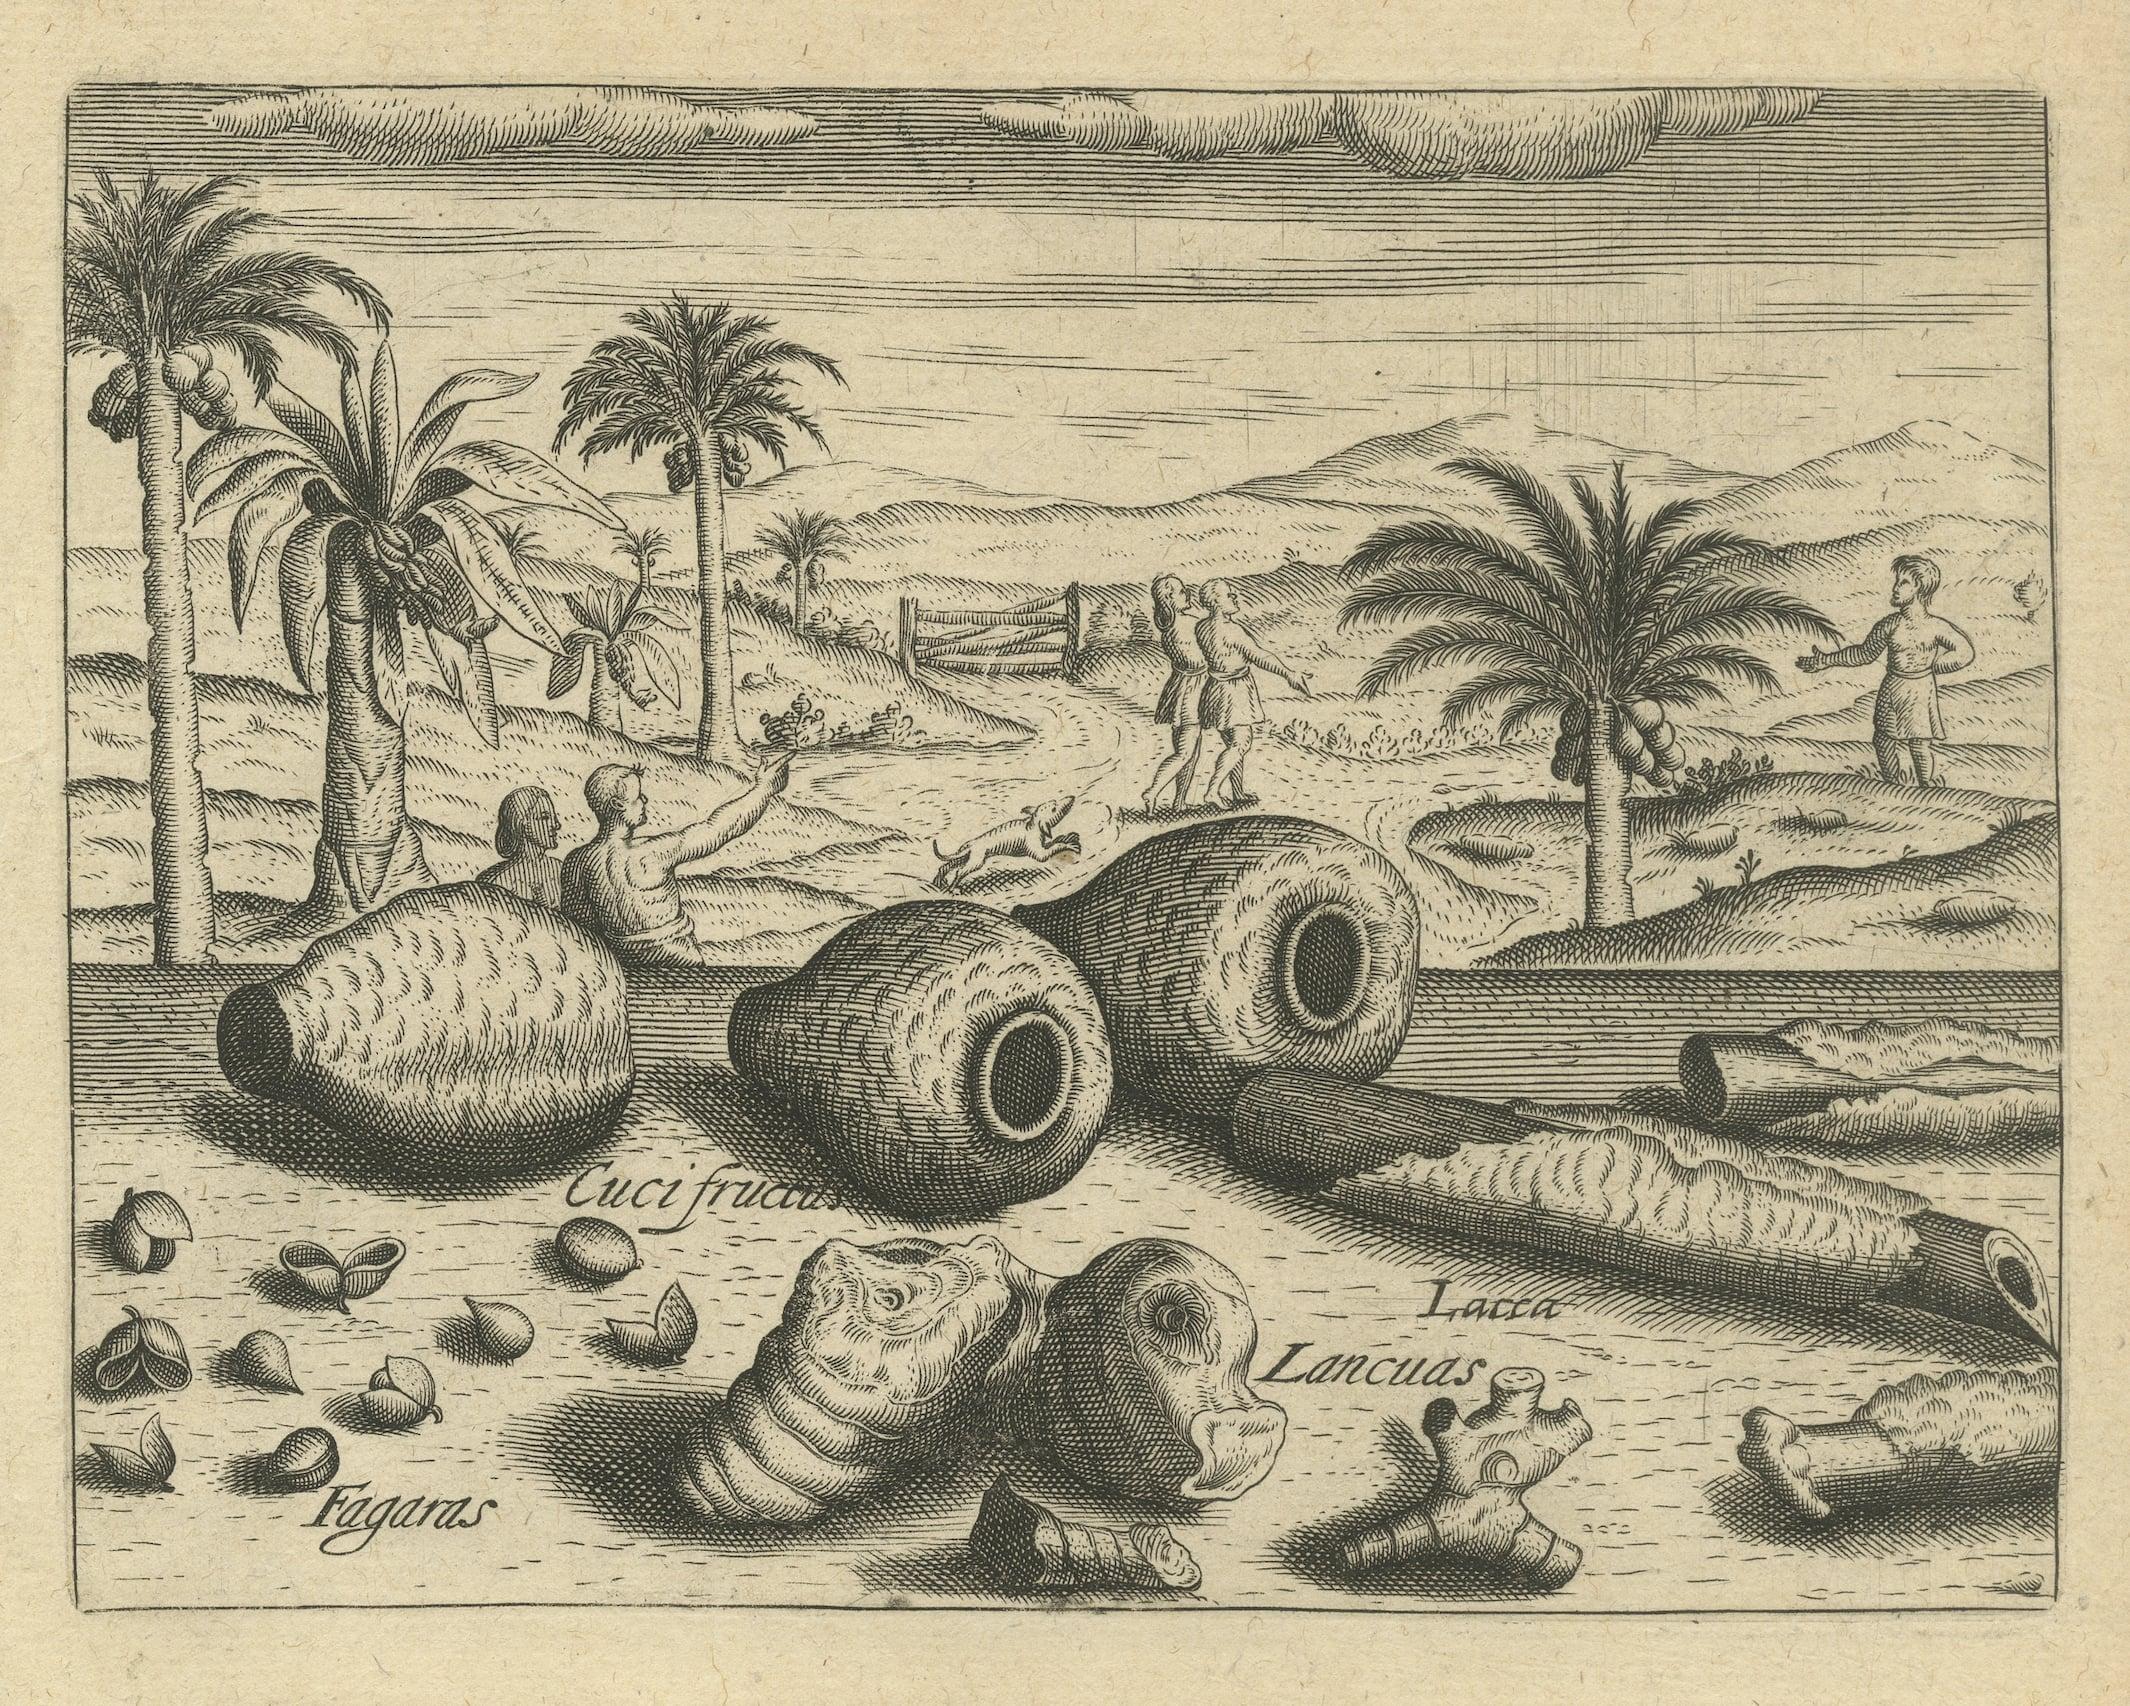 Engraved Treasures of the Tropics: Lac, Lancas, and Fagaras in De Bry's 1601 Engraving For Sale